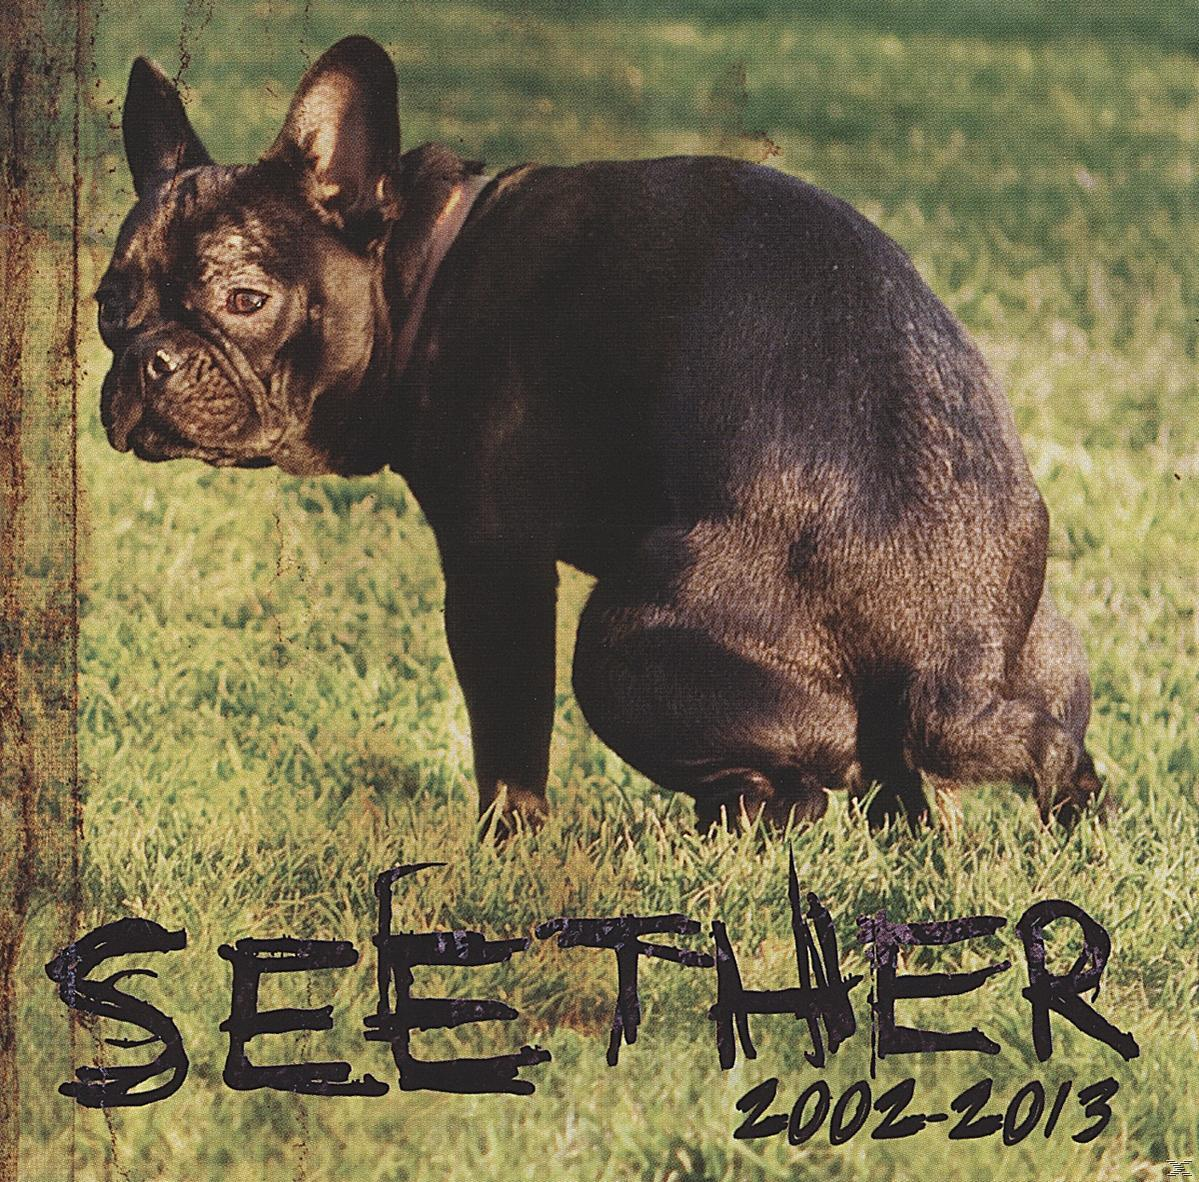 Seether - (CD) 2002-2013 Seether 